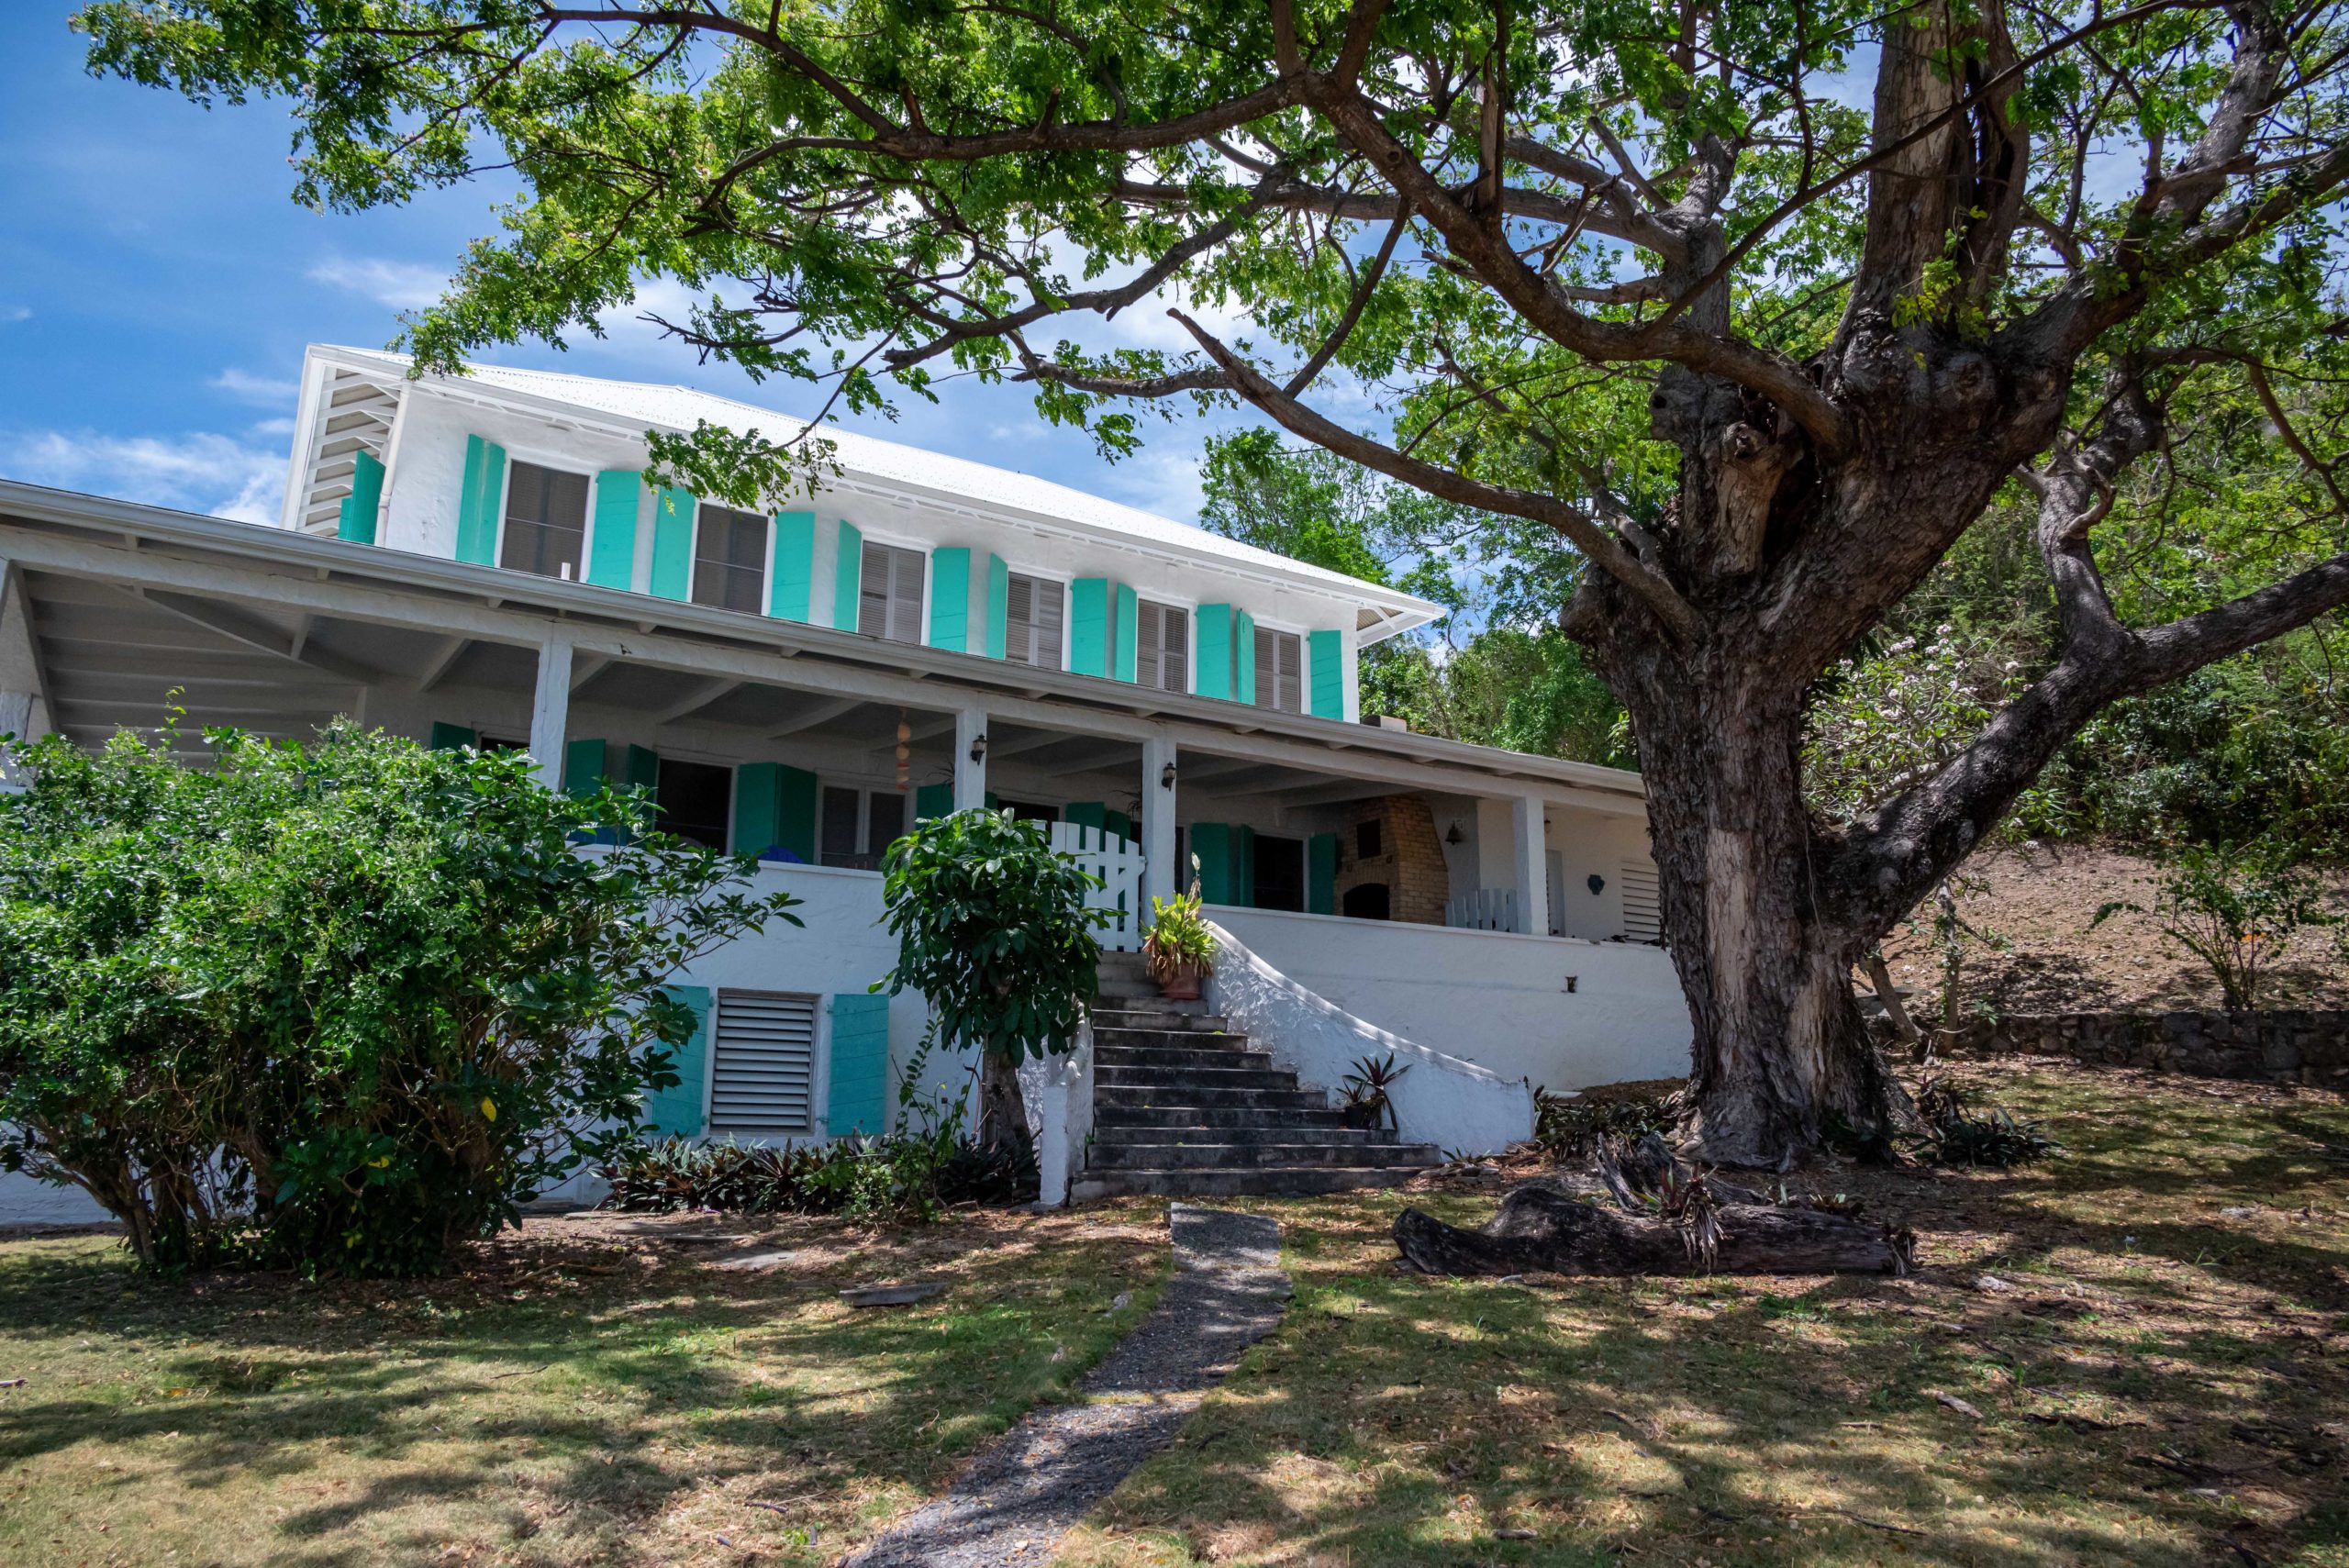 Own History at Beresford Manor, St. Croix